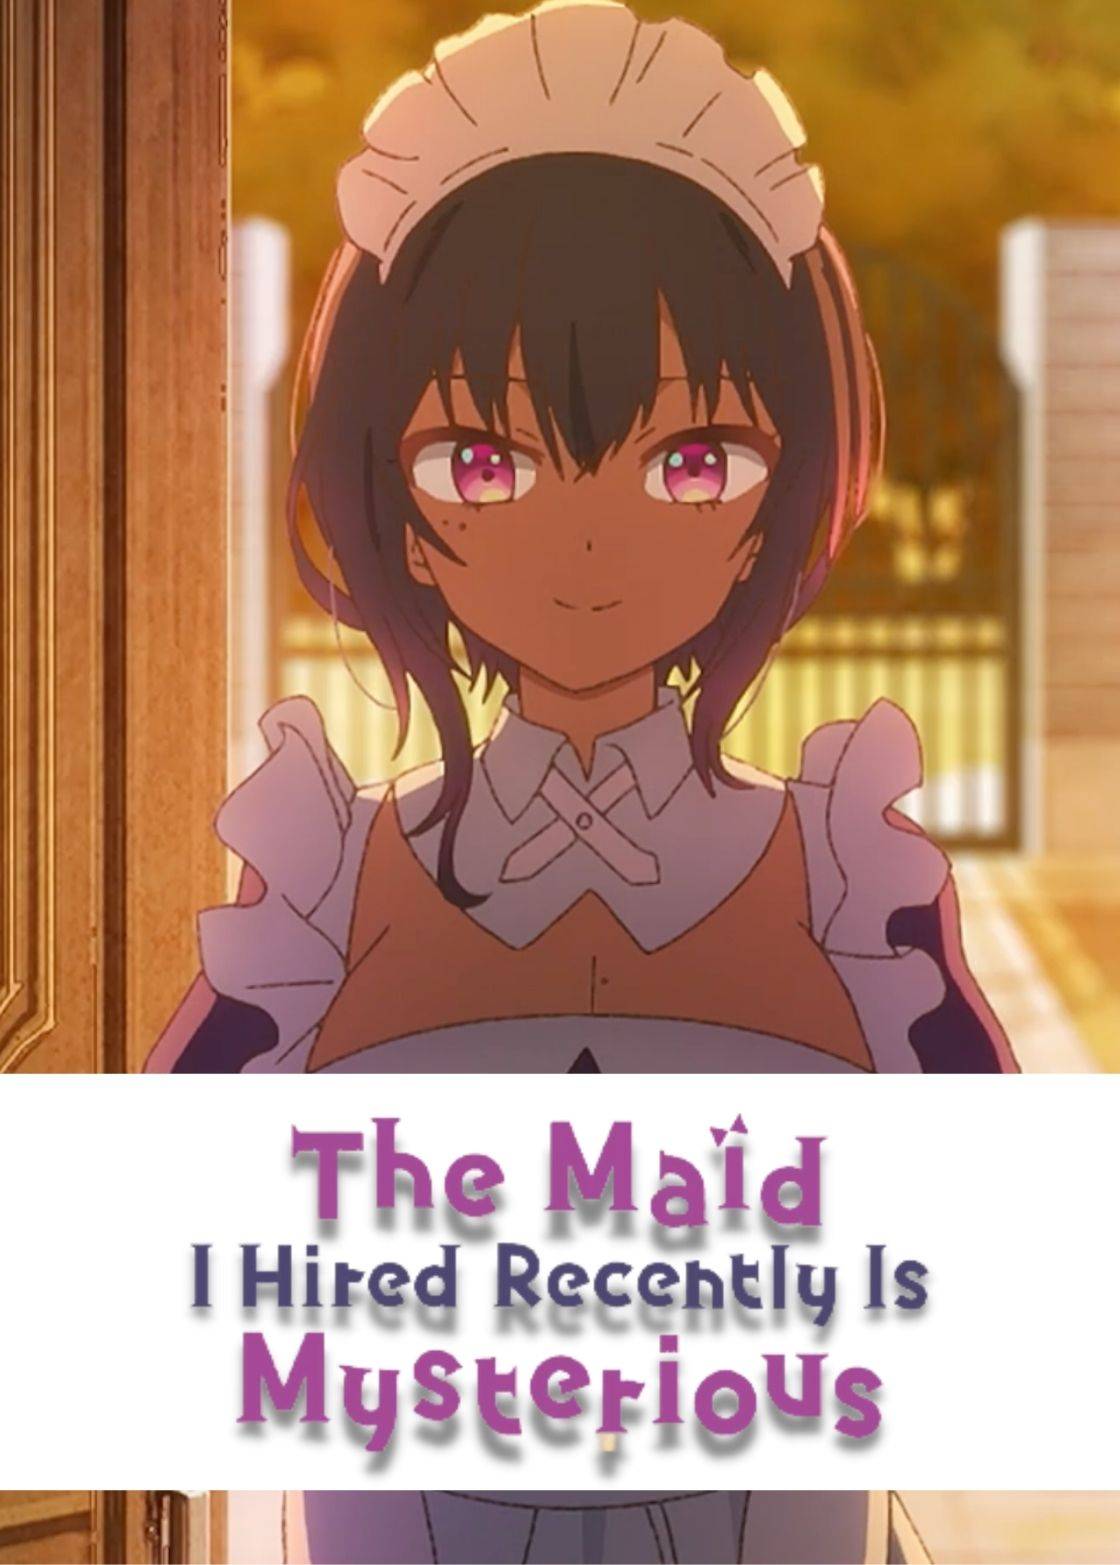 Maid Is Mysterious Episode 8 Introduces the Tsundere Maid Natsume